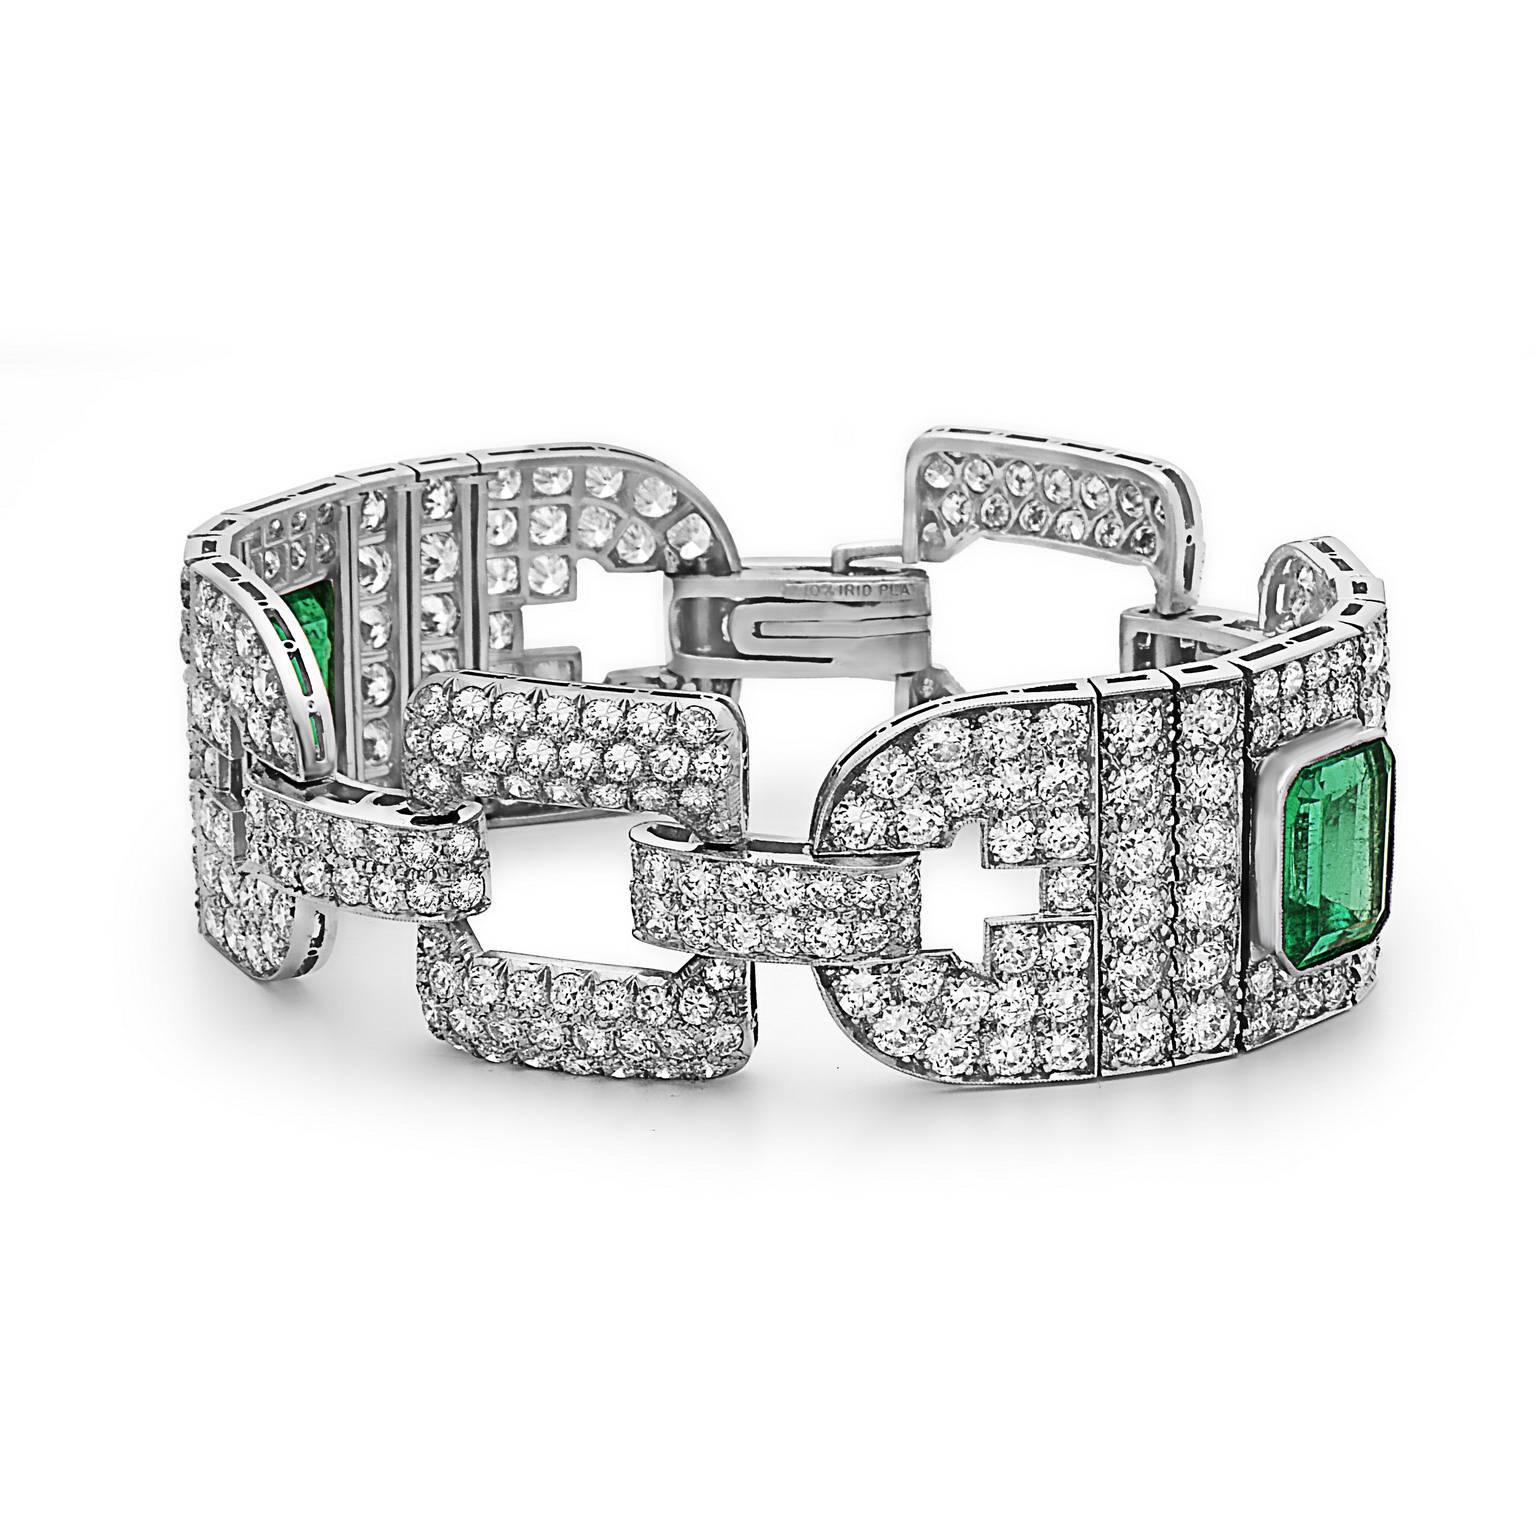 Approx total weight: 25.40 cts
Diamond Color: E
Diamond Clarity: Vvs1 
Cut: Excellent 
Length: 7 inch
2 Emeralds: 10.00 Carats Deep gorgeous perfectly cut clean emeralds, which are extremely rare! 
Diamonds: 15.40 cts
All Emilio! pieces come with a